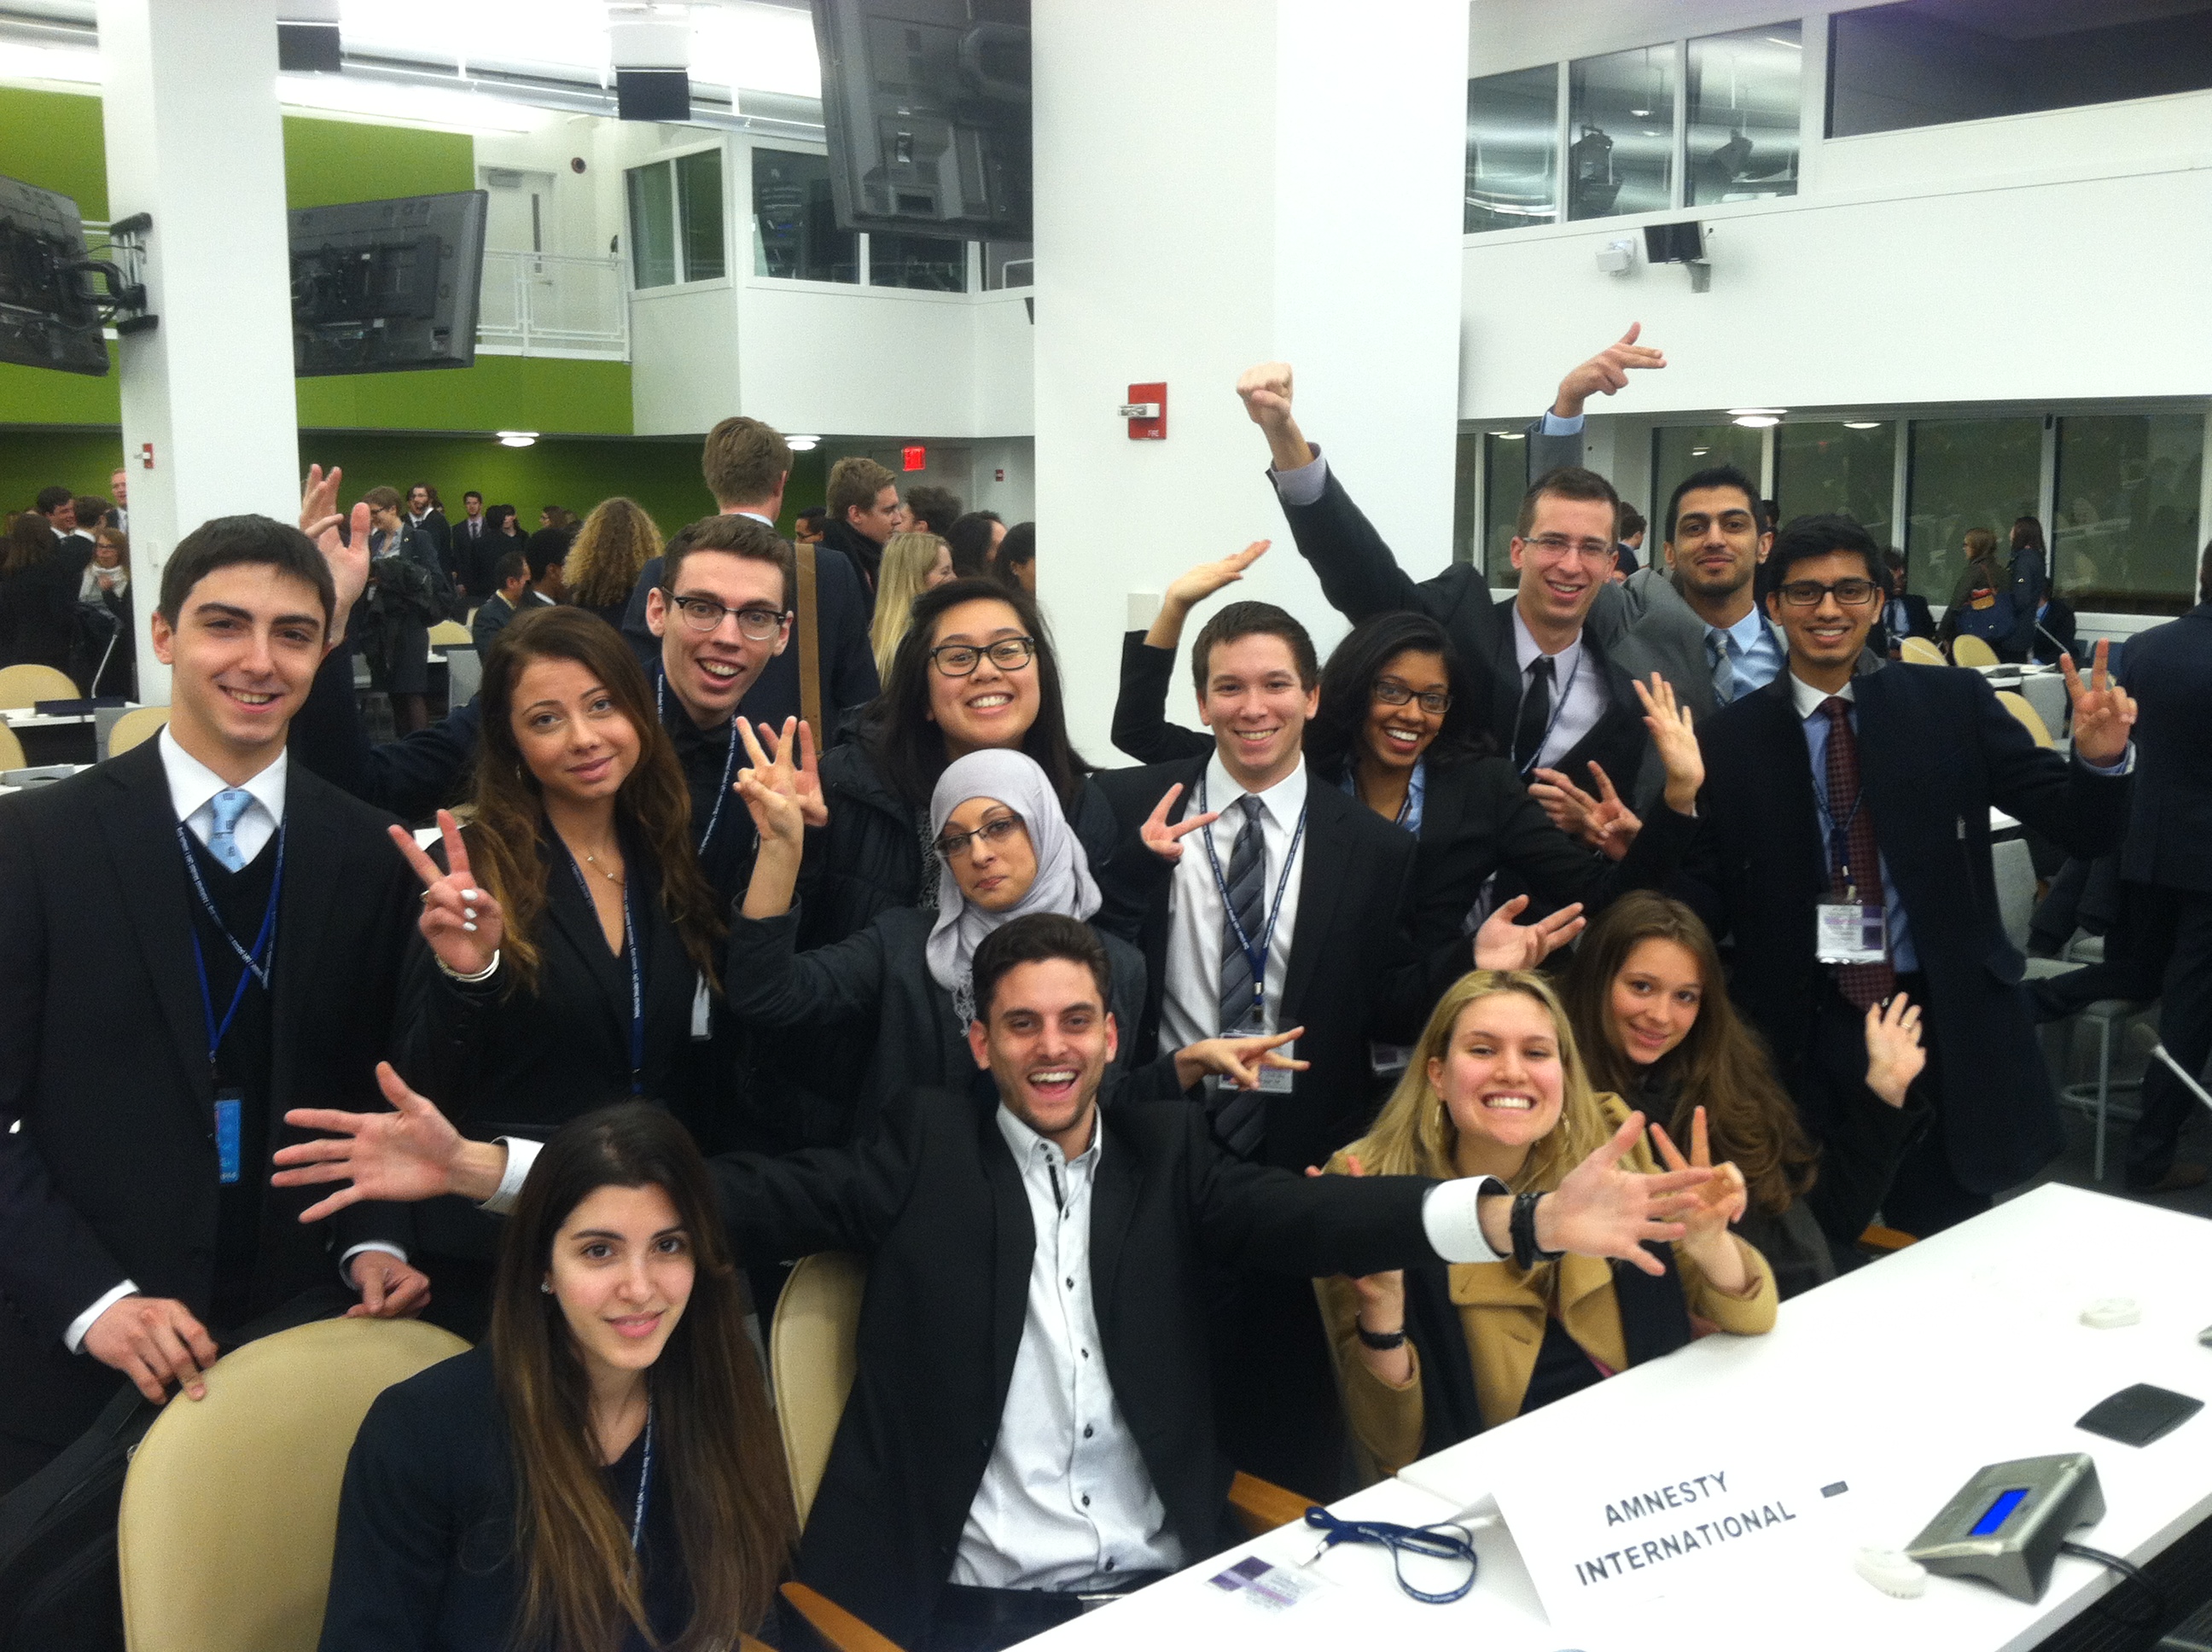 Pace University New York City Model United Nations students at the Union Nations participating in the 2014 National Model UN conference.  